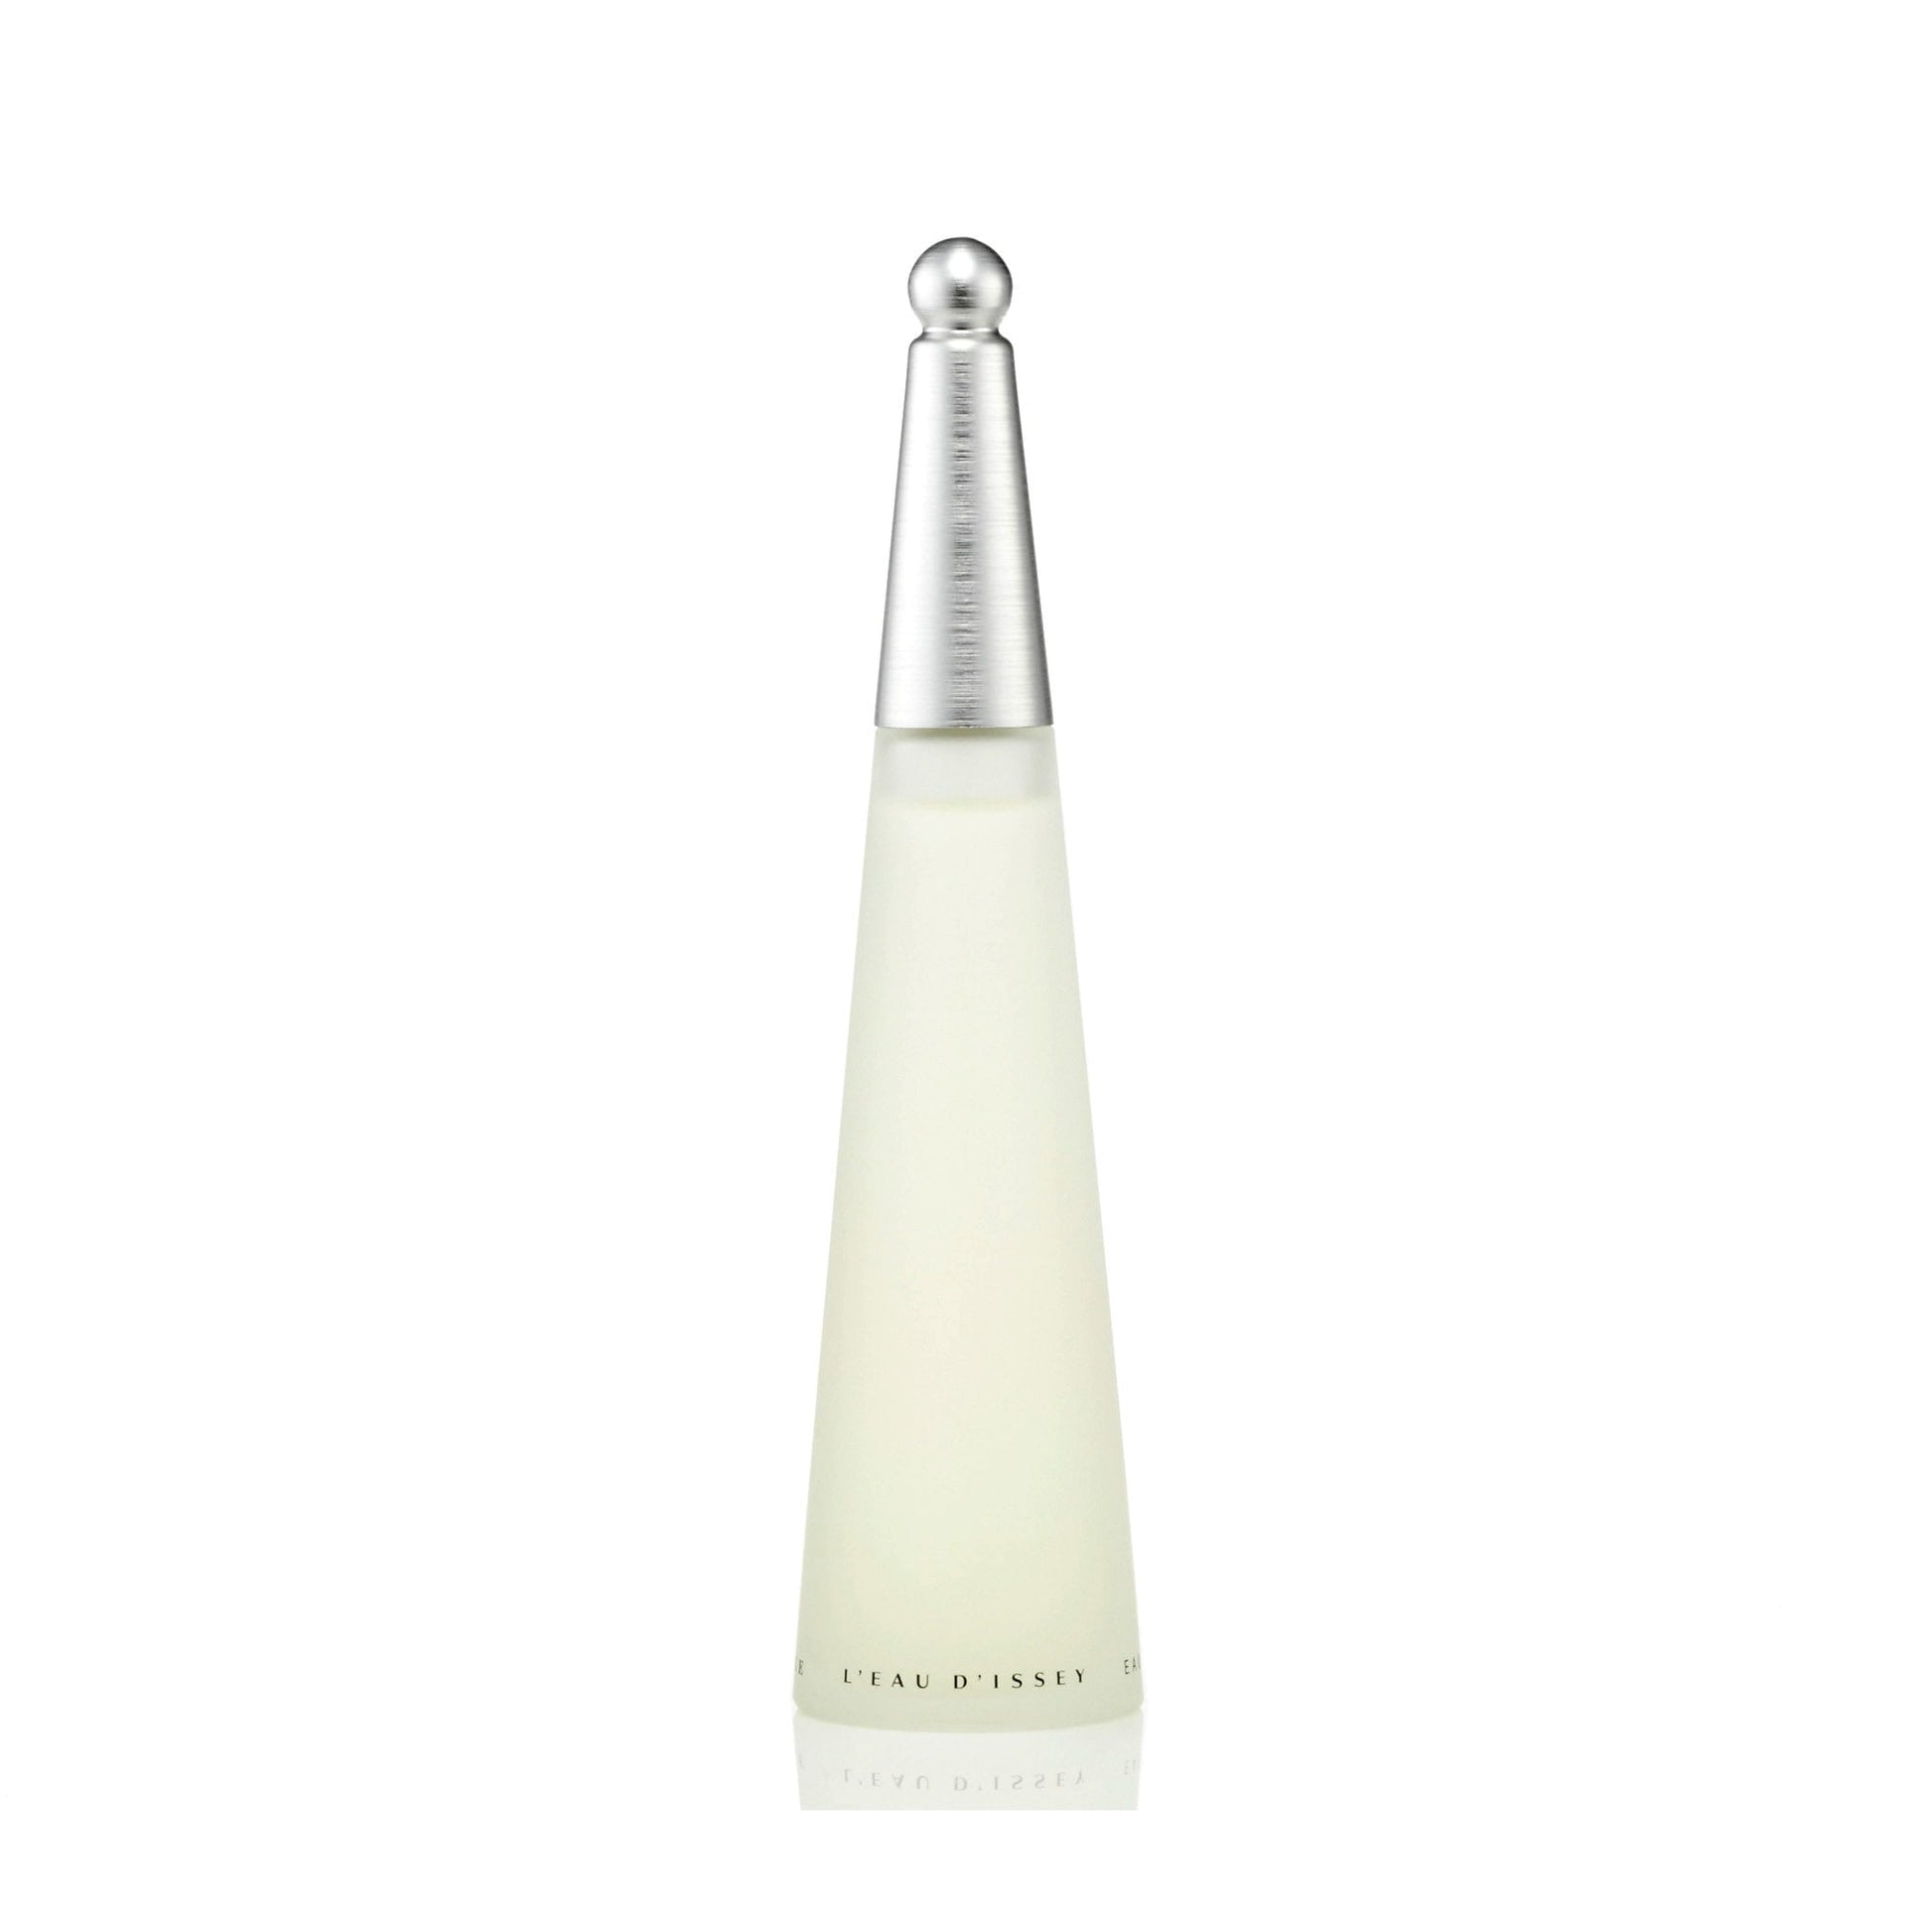 L'Eau Dissey Eau de Toilette Spray for Women by Issey Miyake, Product image 2